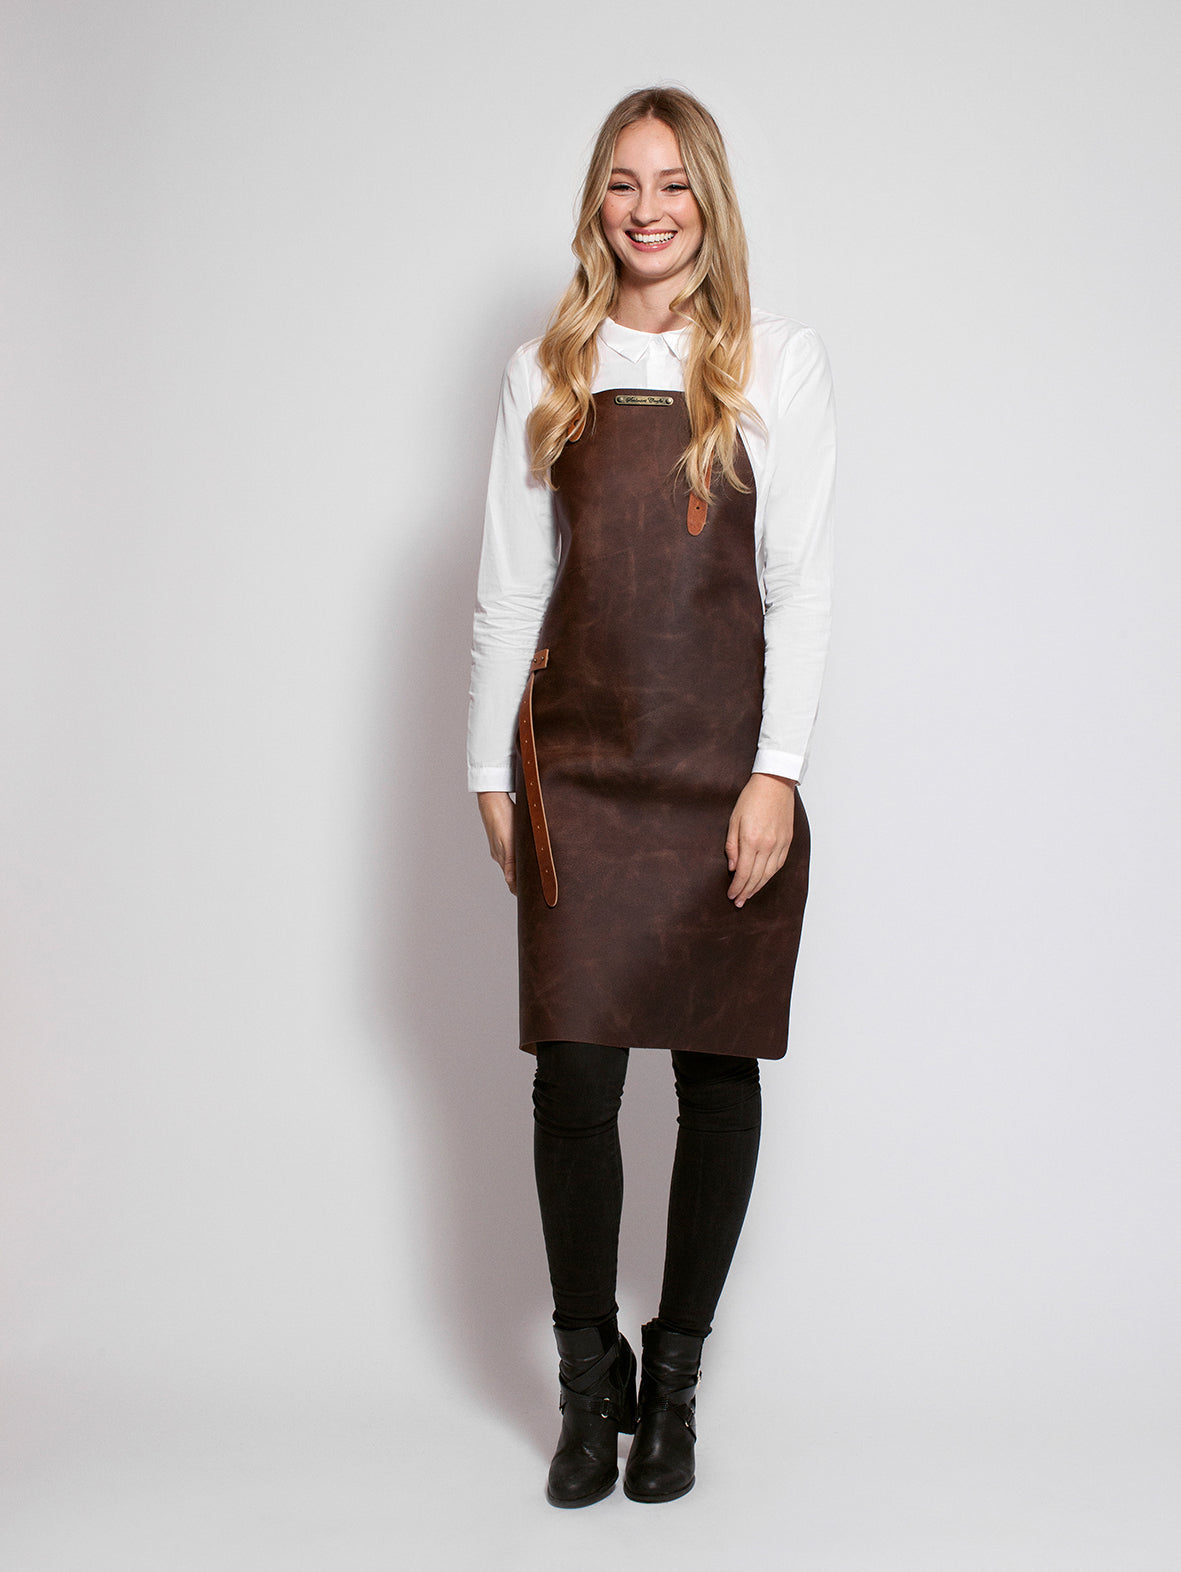 Leather Apron Basic Brown by Stalwart -  ChefsCotton